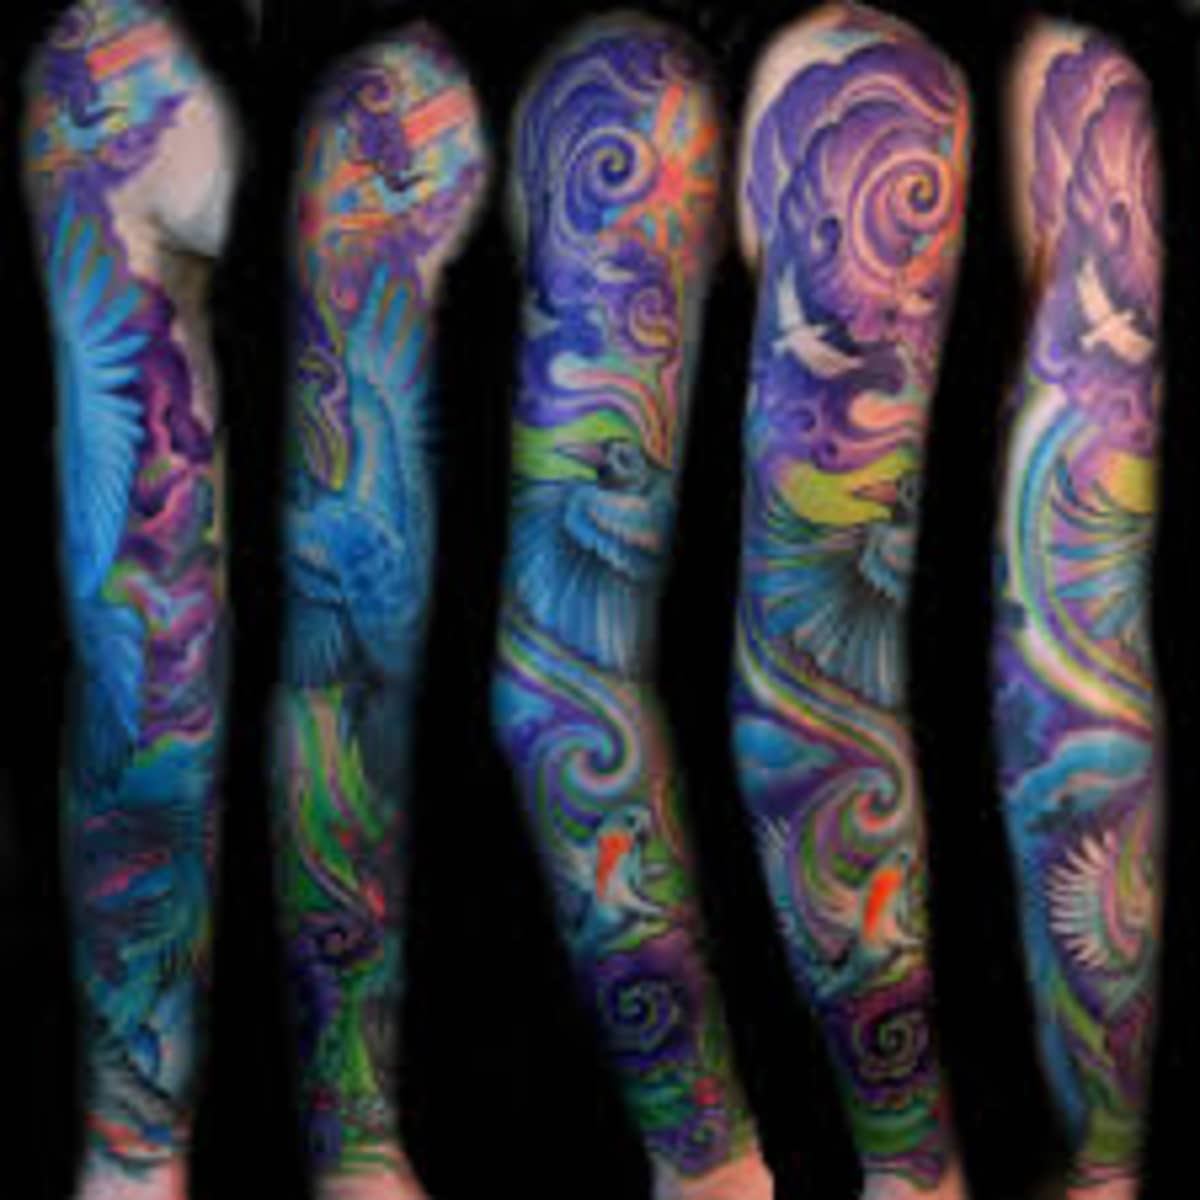 Sleeve Tattoo Designs And Ideas-Sleeve Tattoo Themes - HubPages